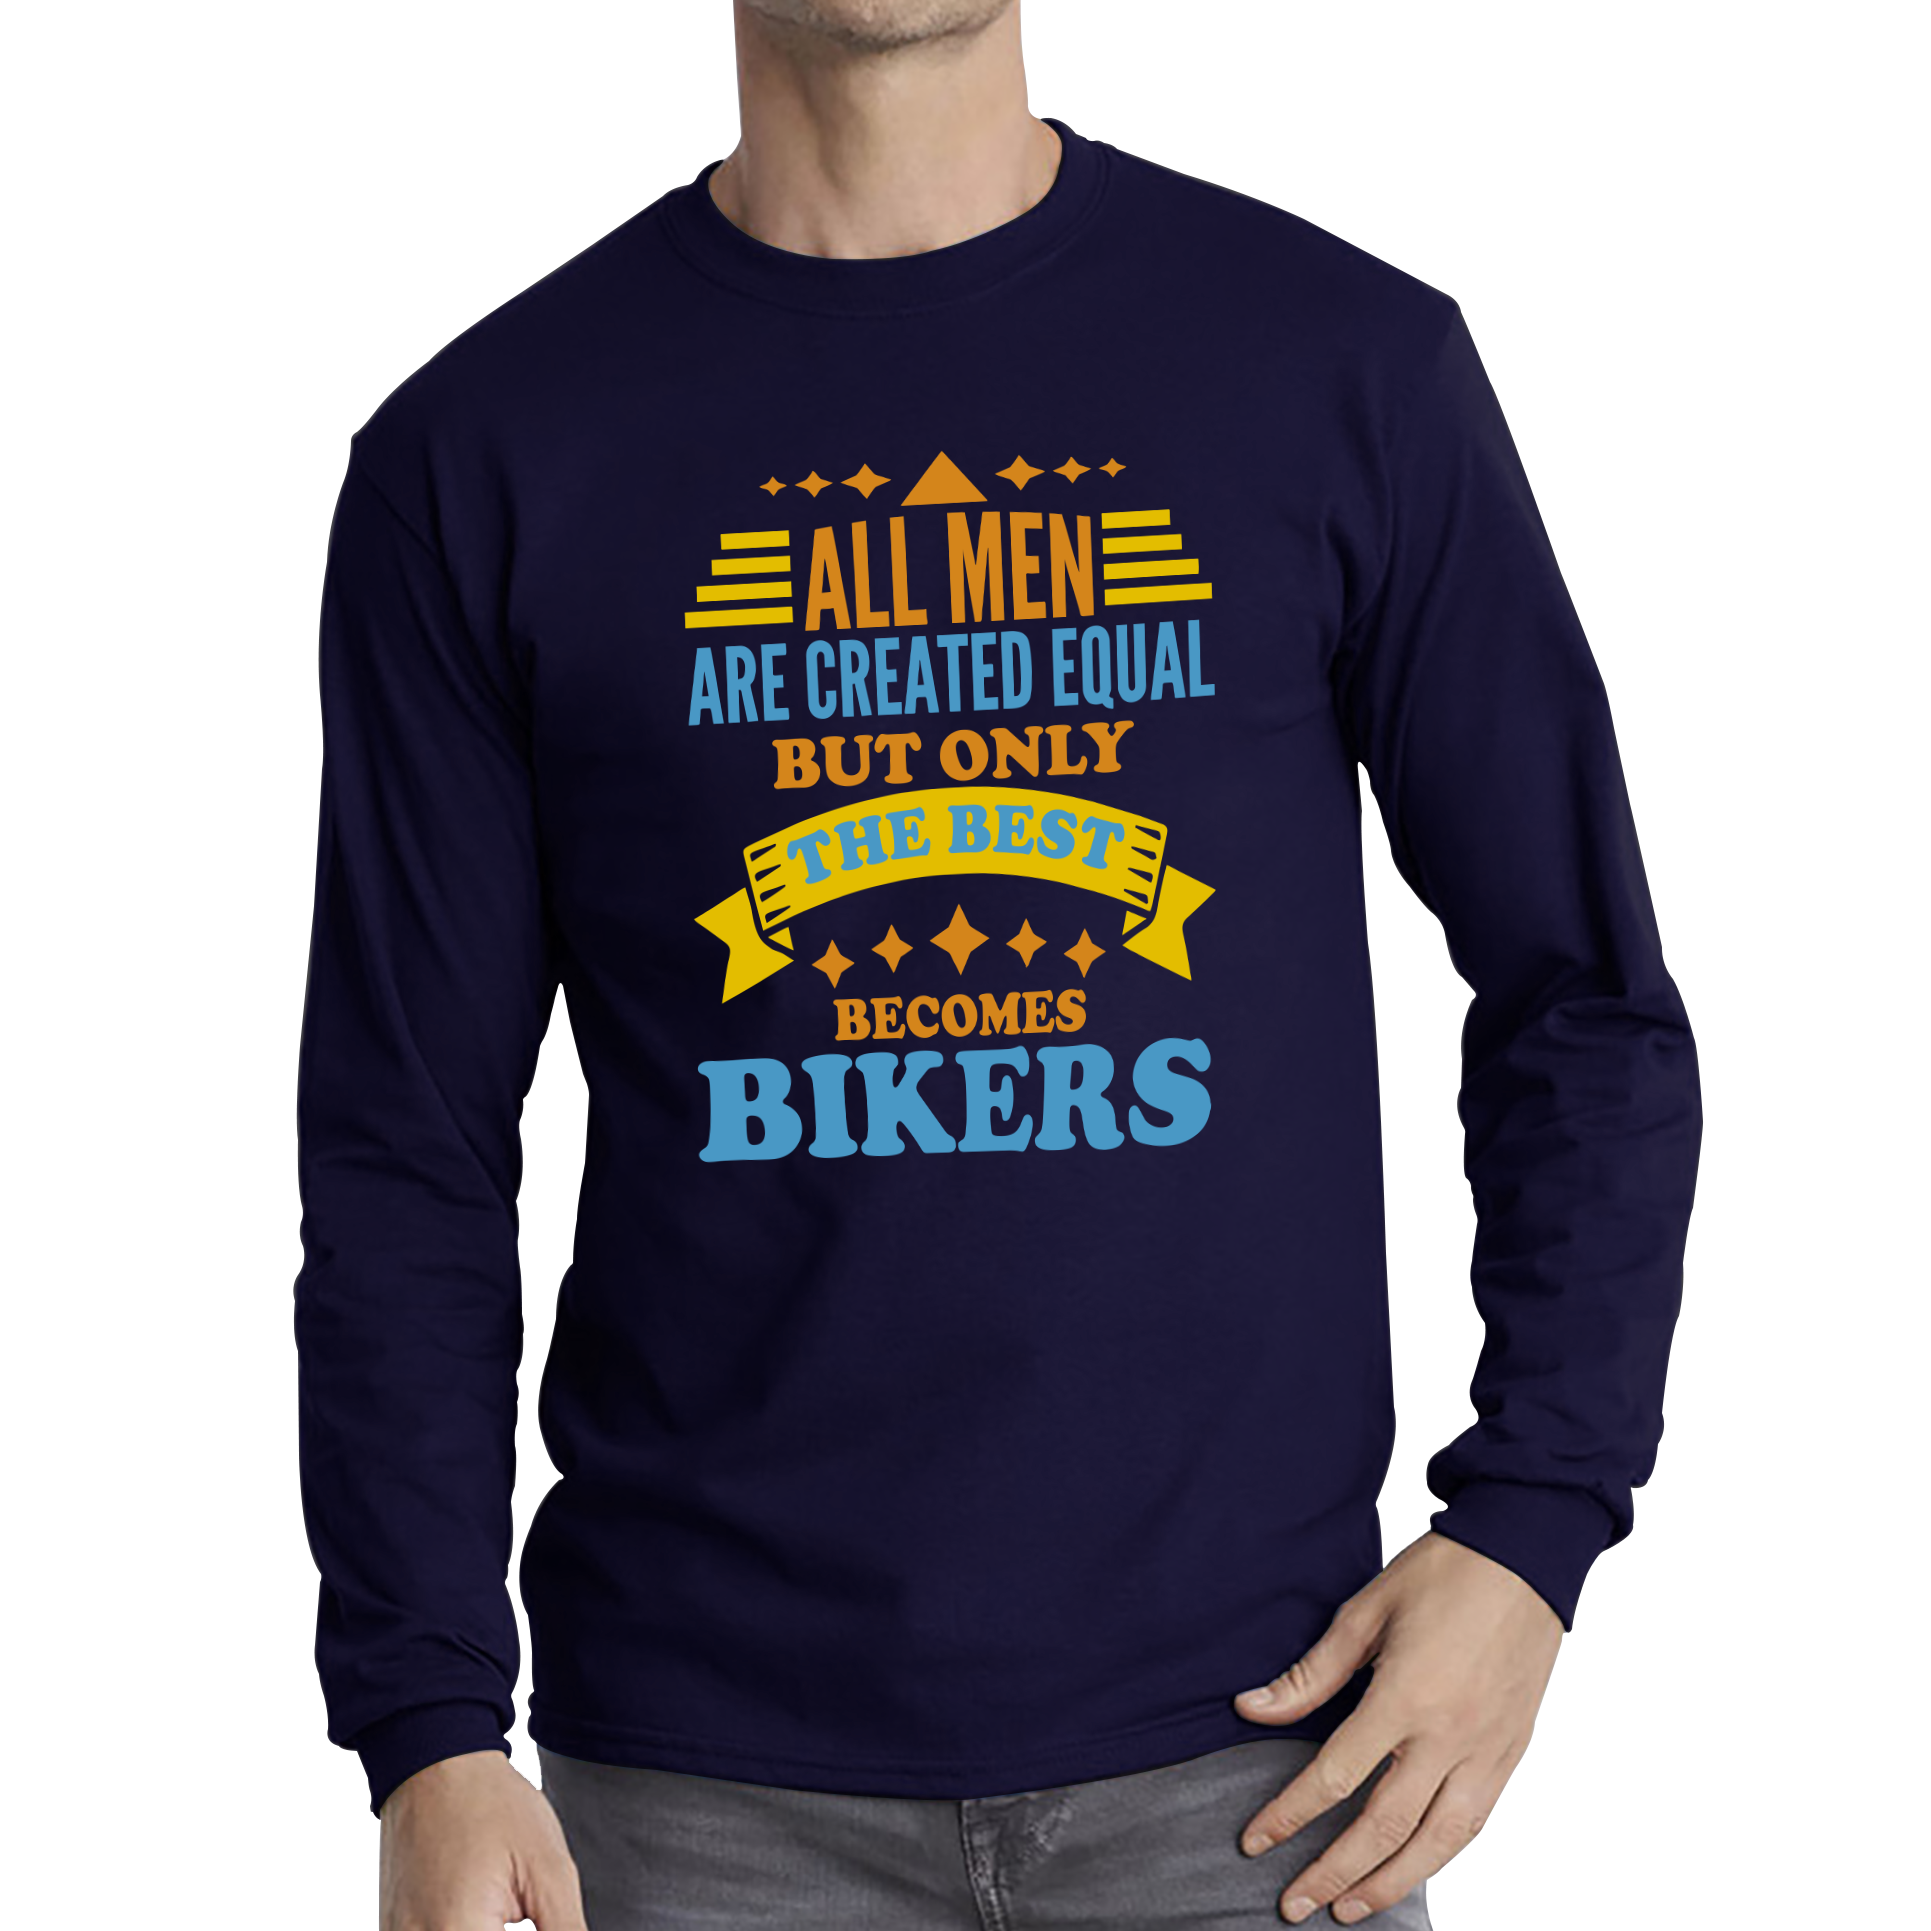 All Men Are Created Equal But Only The Best Becomes Bikers Long Sleeve T Shirt